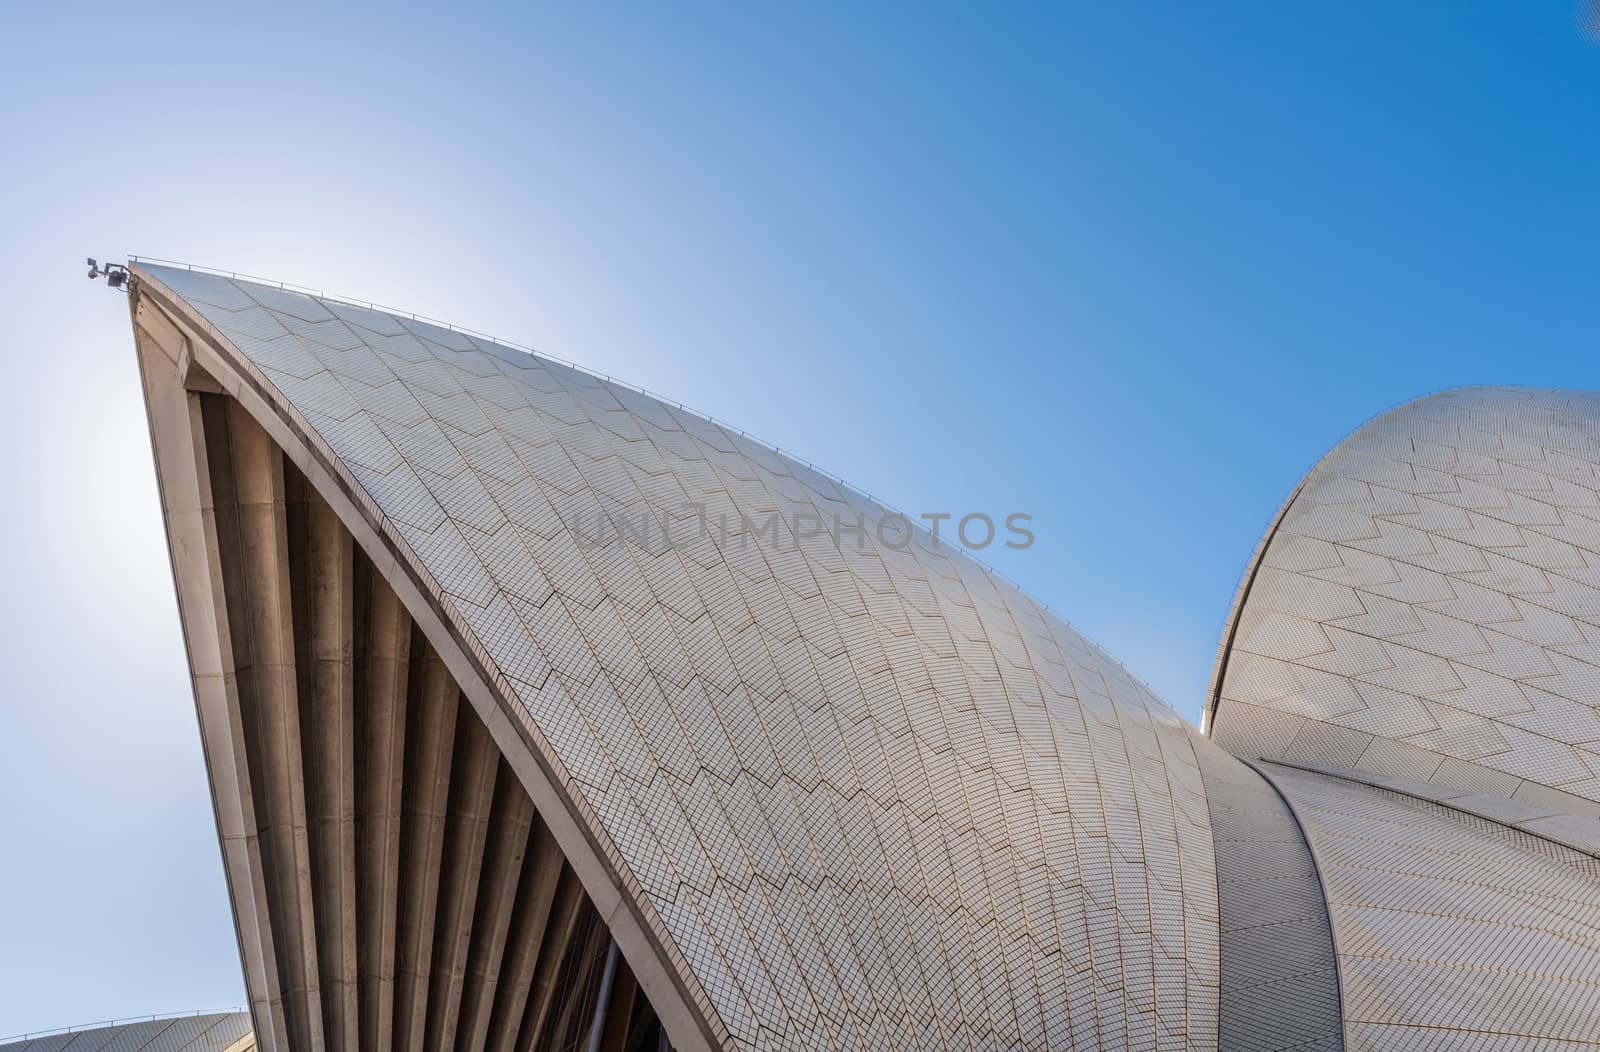 Sydney, Australia - February 11, 2019: Detail of white roof structure of Sydney Opera House against deep blue sky. 7 of 12.